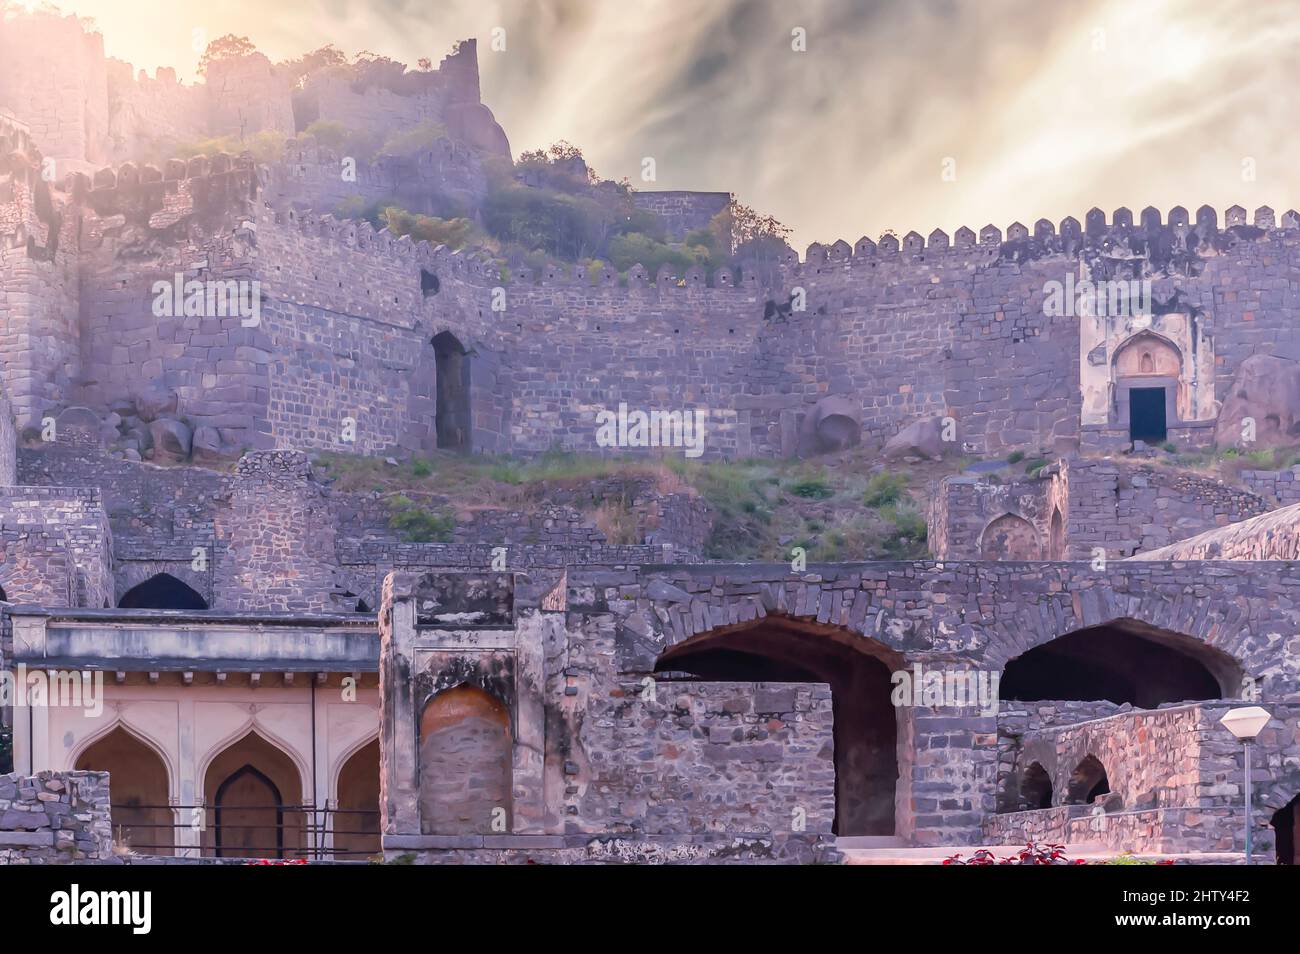 An inside view of the ruins of the historic 16th century Golconda Fort in Hyderabad, India. The fort is listed as an archaeological treasure.. Stock Photo